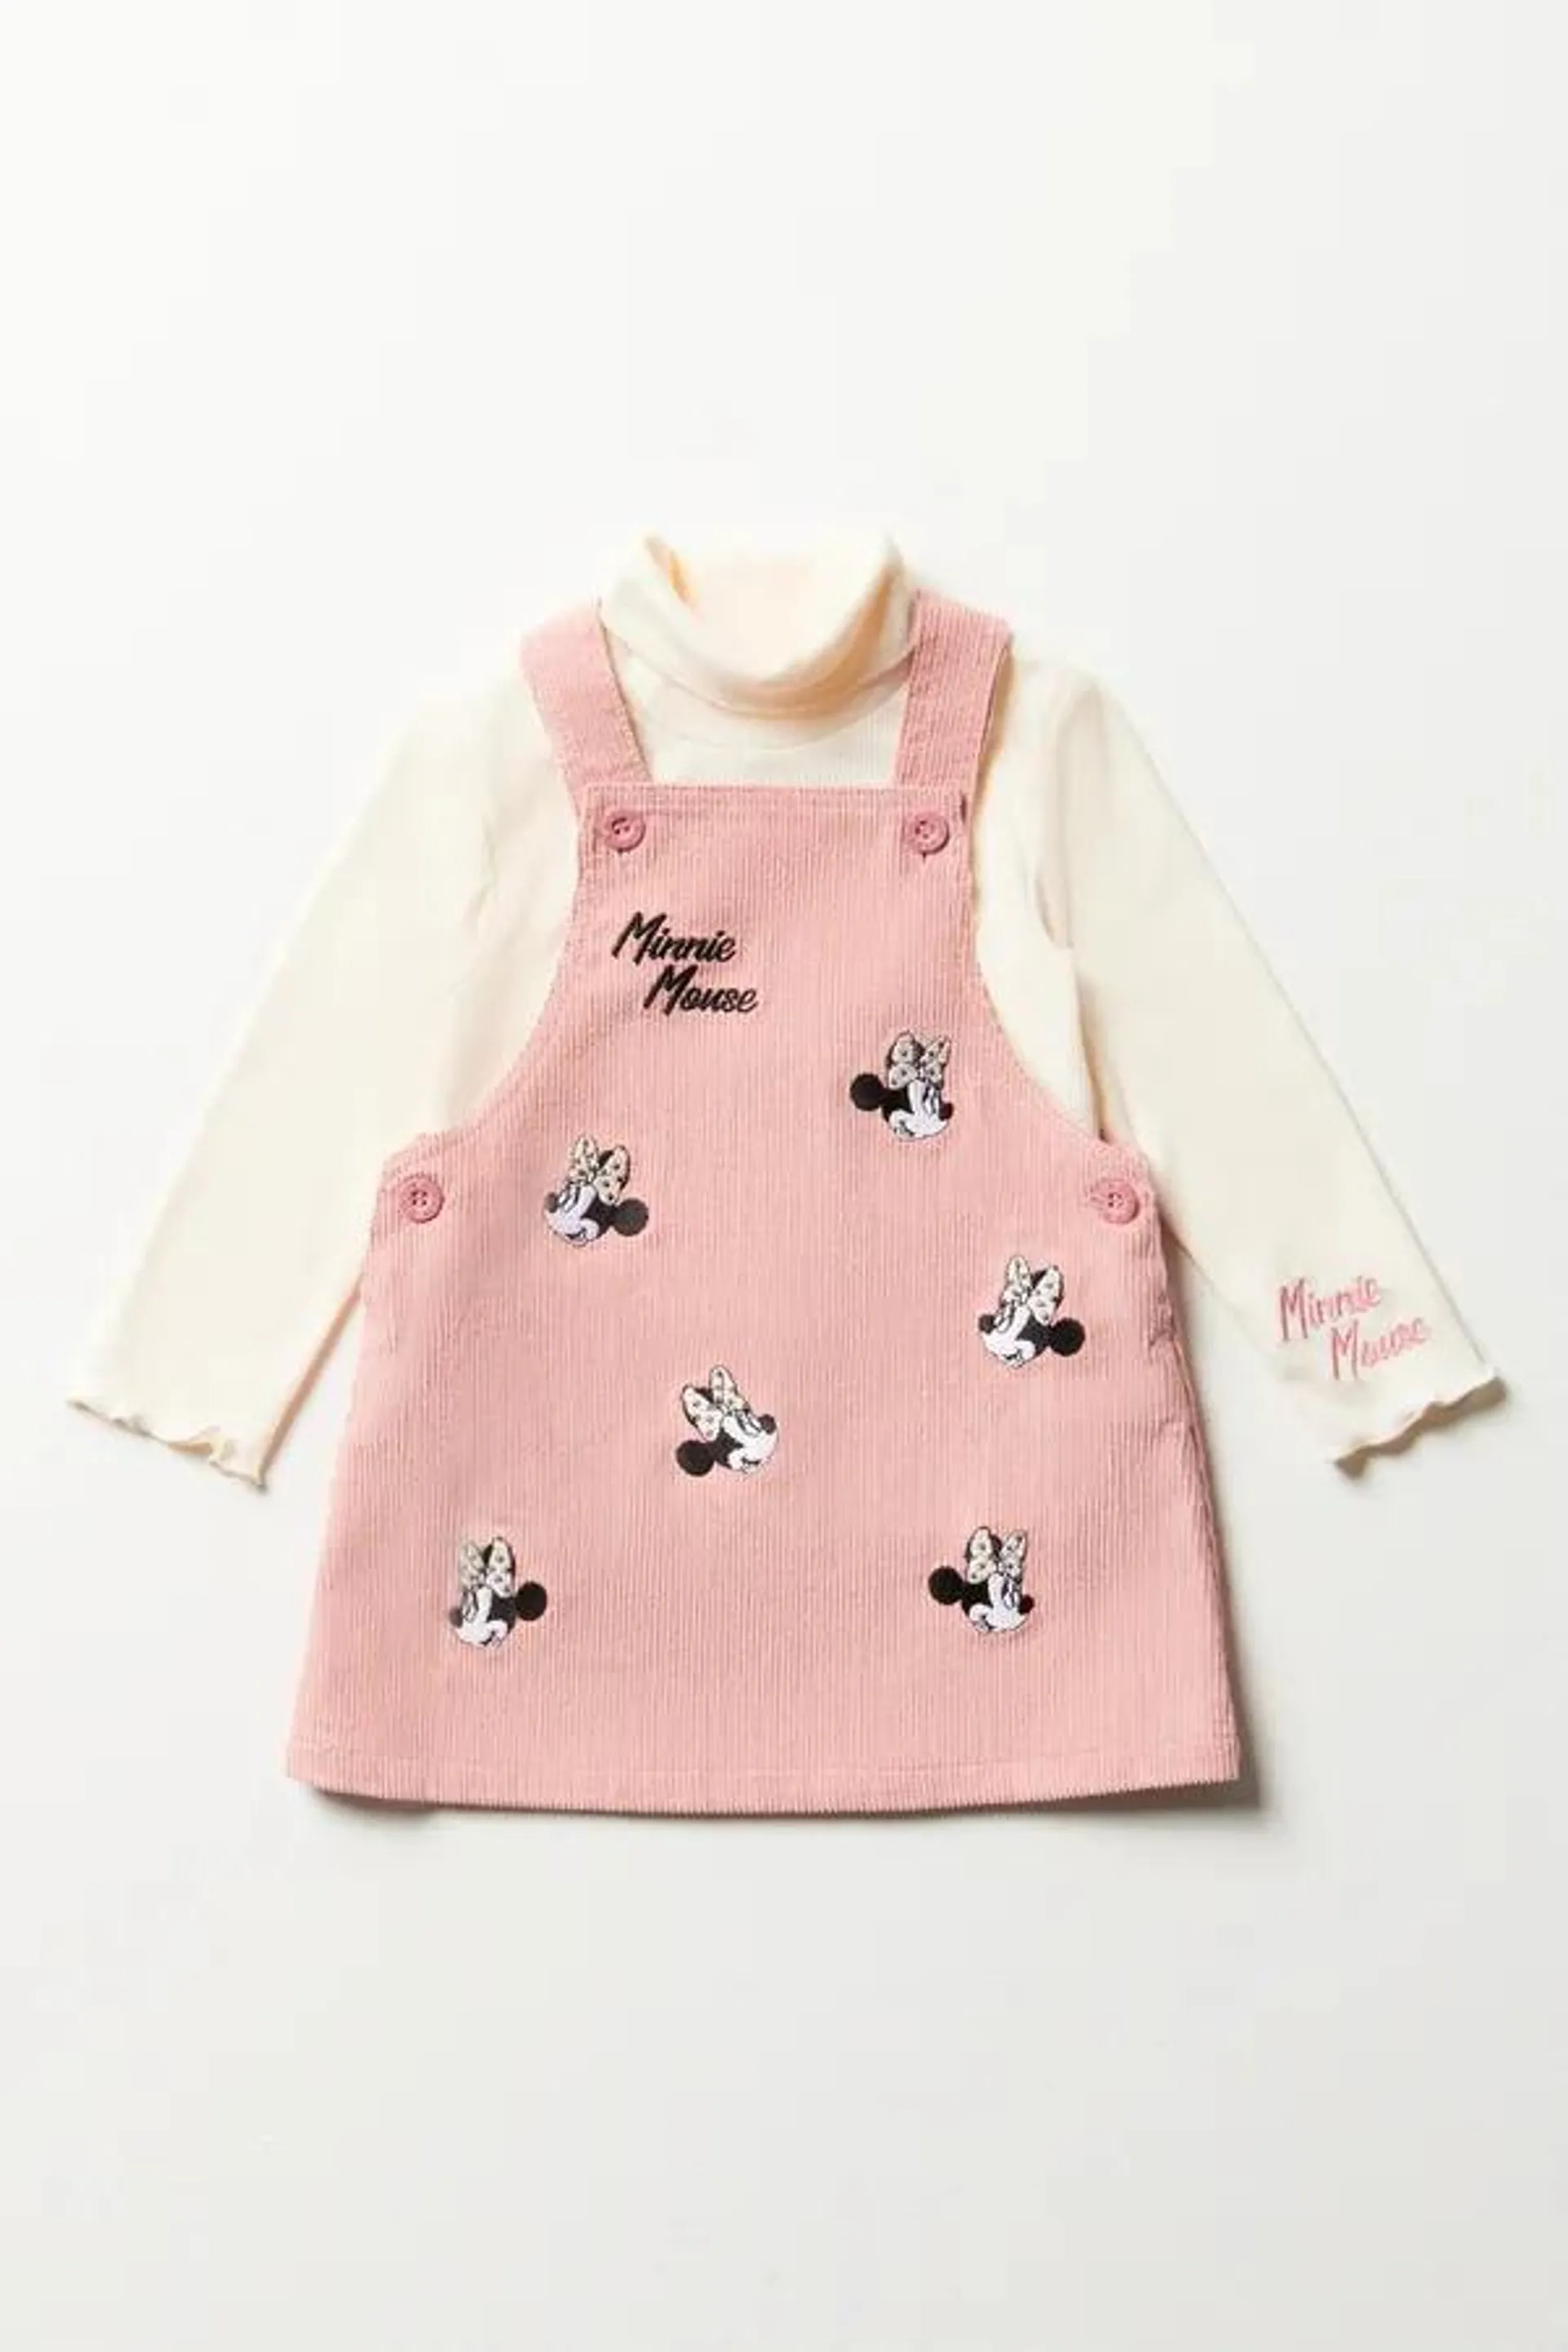 Minnie Mouse pinafore set pink